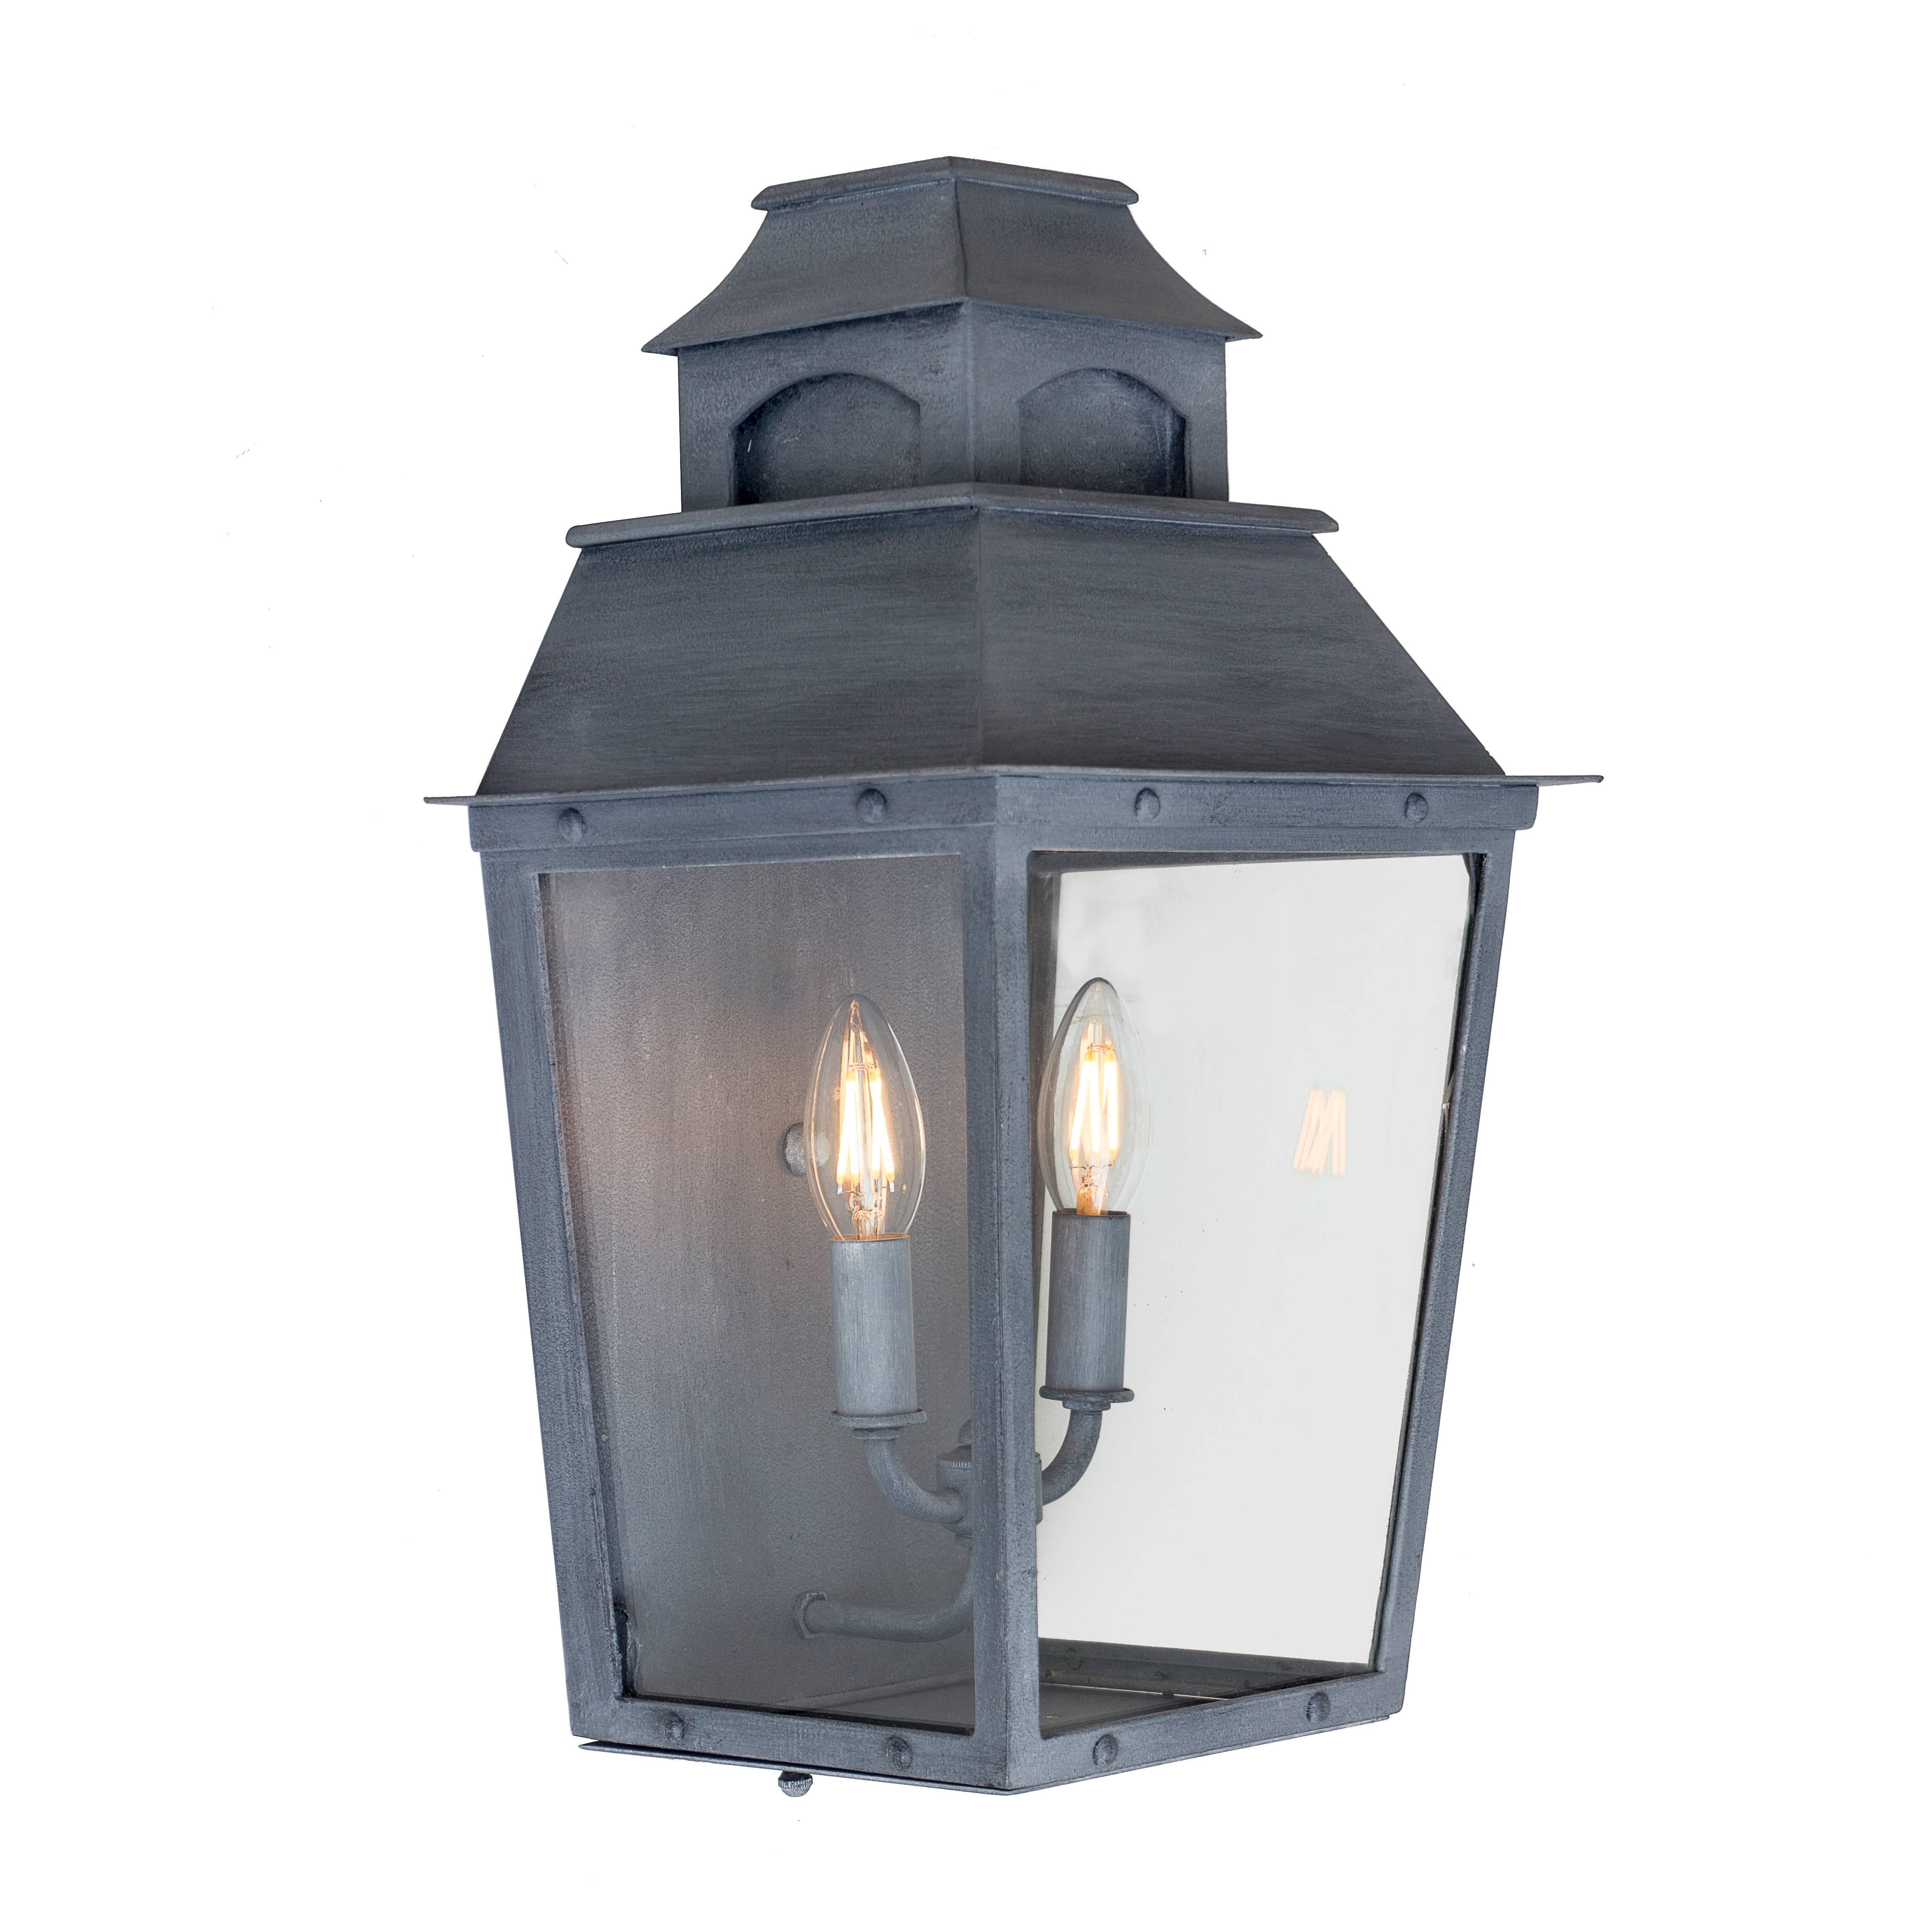 Forged Colonial Custom Inspired Wrought Iron Wall Lantern with Premium Zinc Finish For Sale